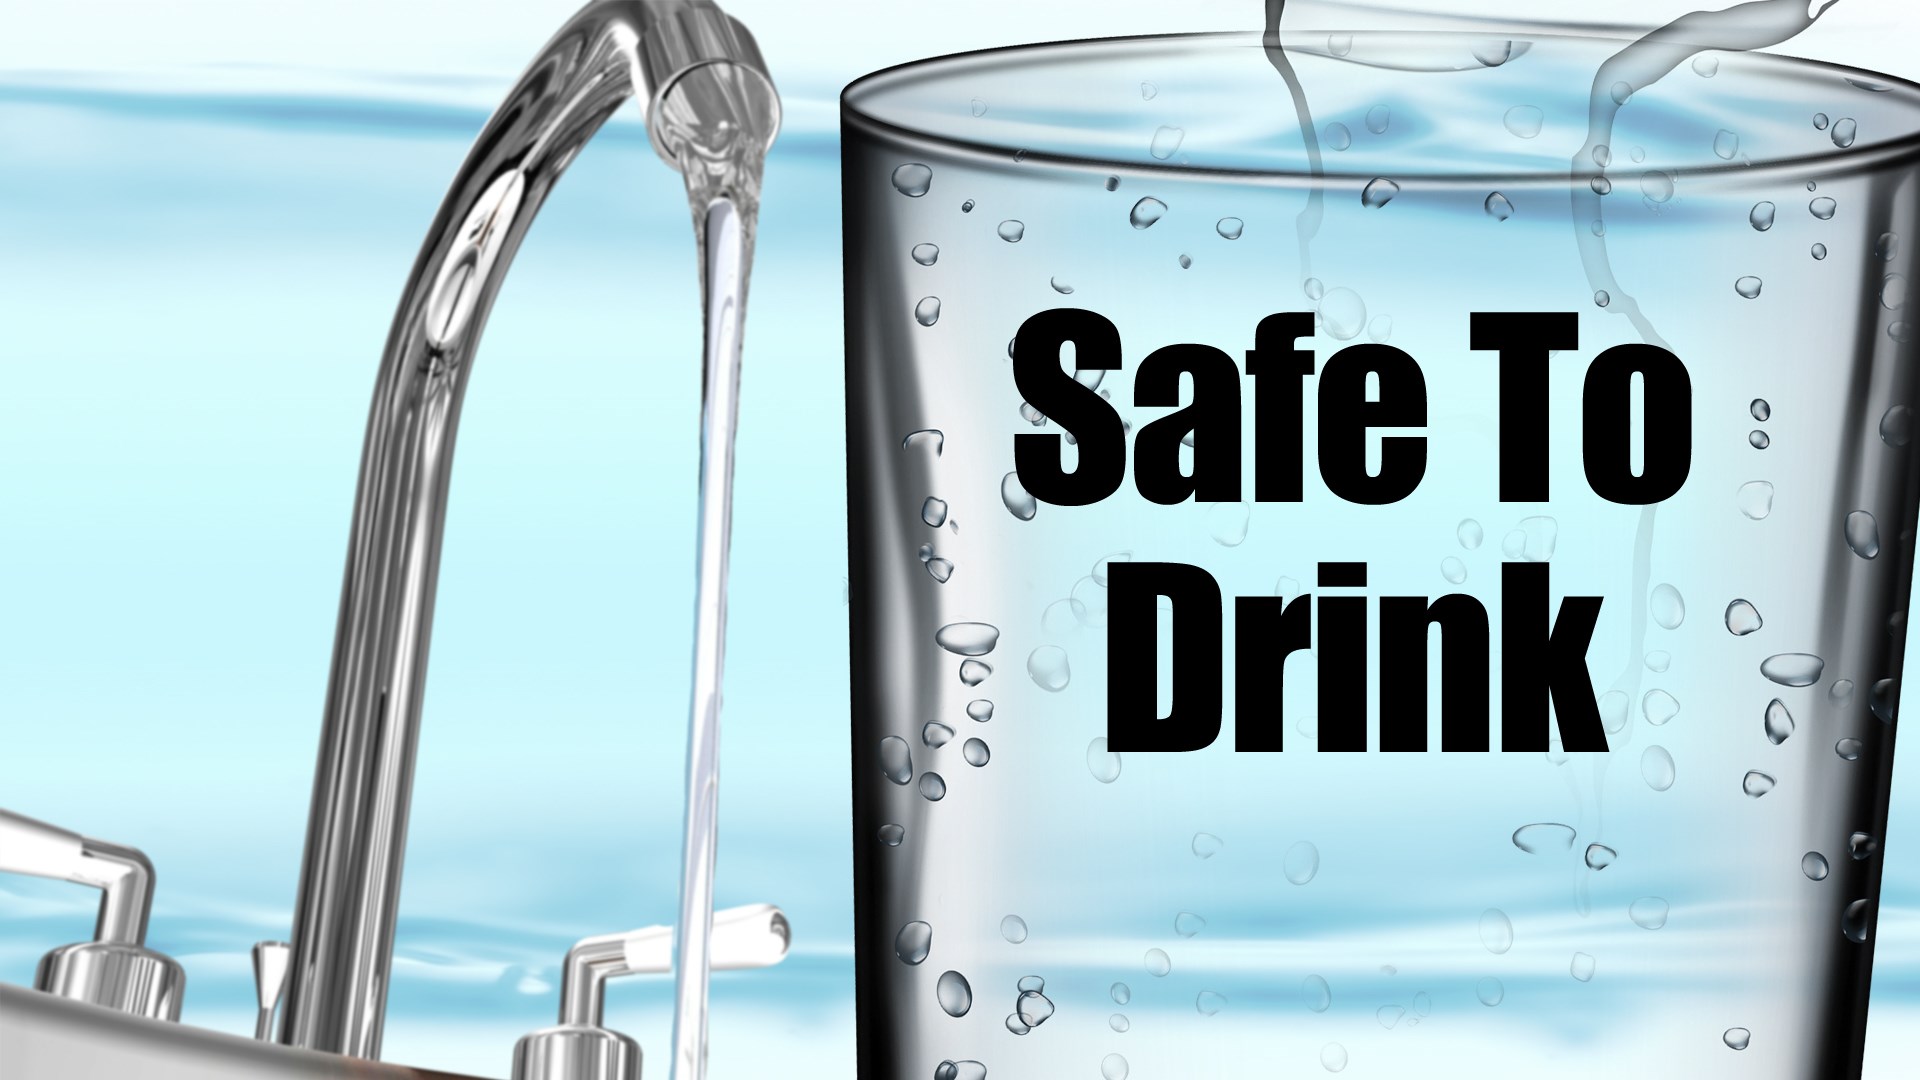 is-my-tap-water-safe-to-drink-how-to-tell-if-it-is-safe-to-drink